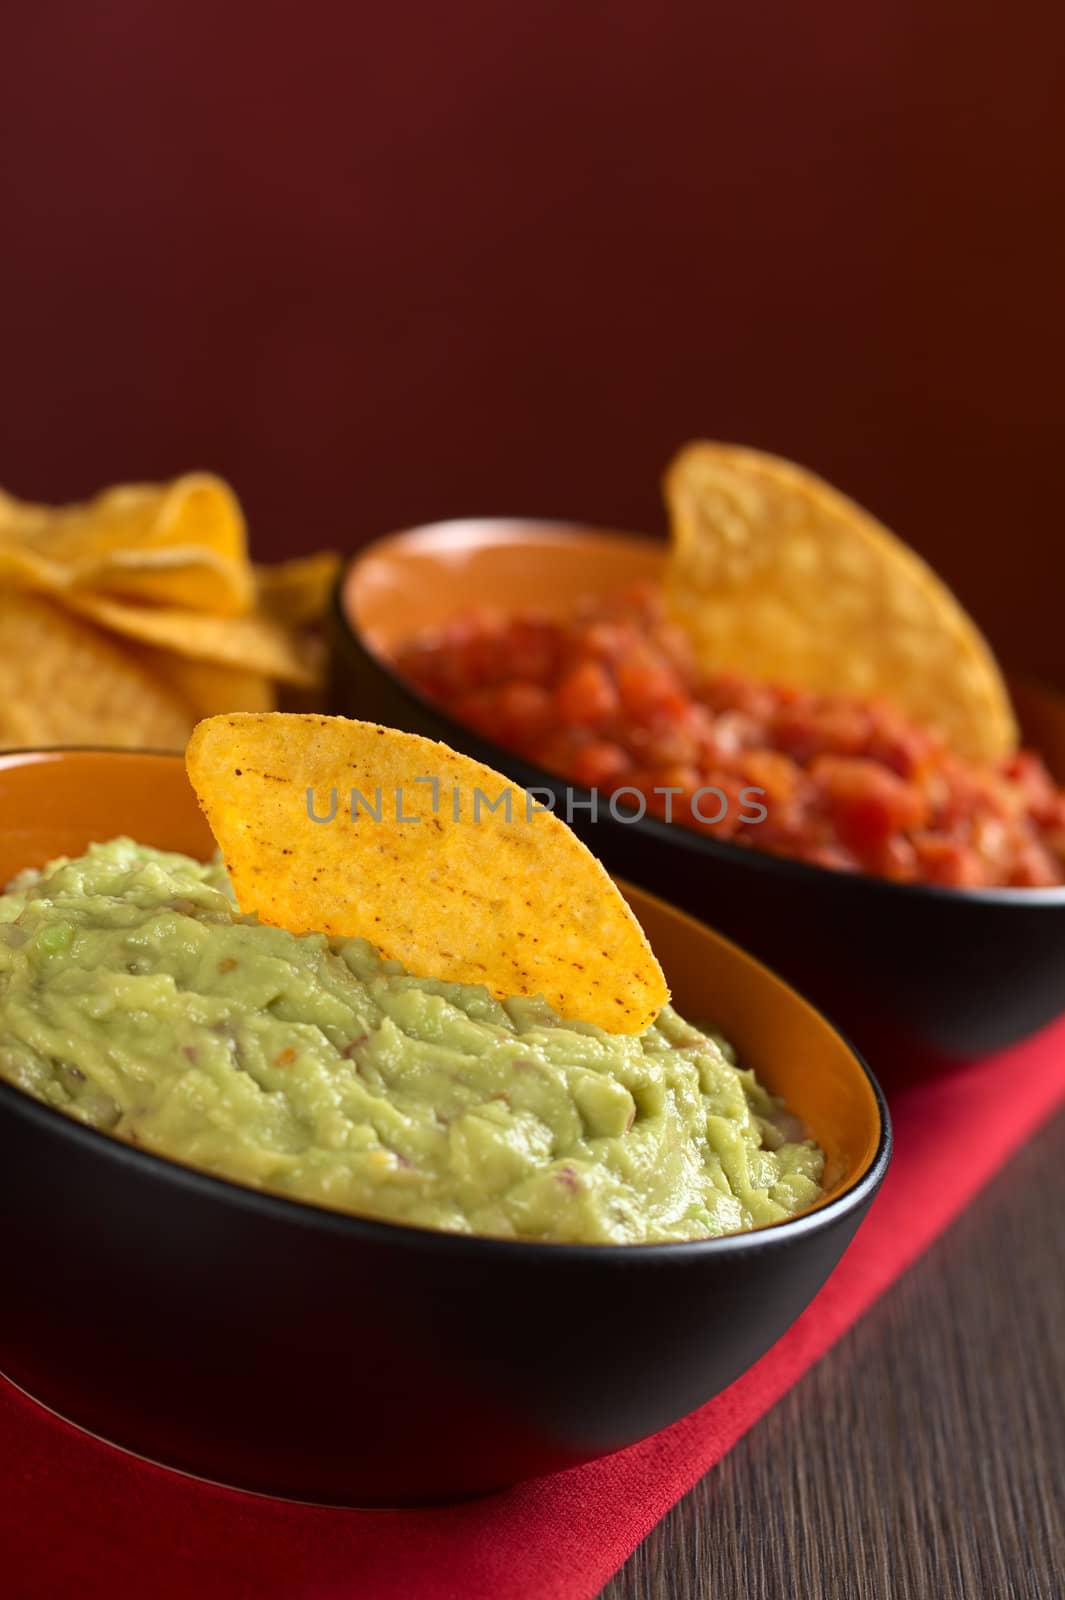 Fresh homemade guacamole, a Mexican sauce made of mainly avocado cream with a nacho on top with tomato sauce in the back (Selective Focus, Focus on the nacho in the guacamole)